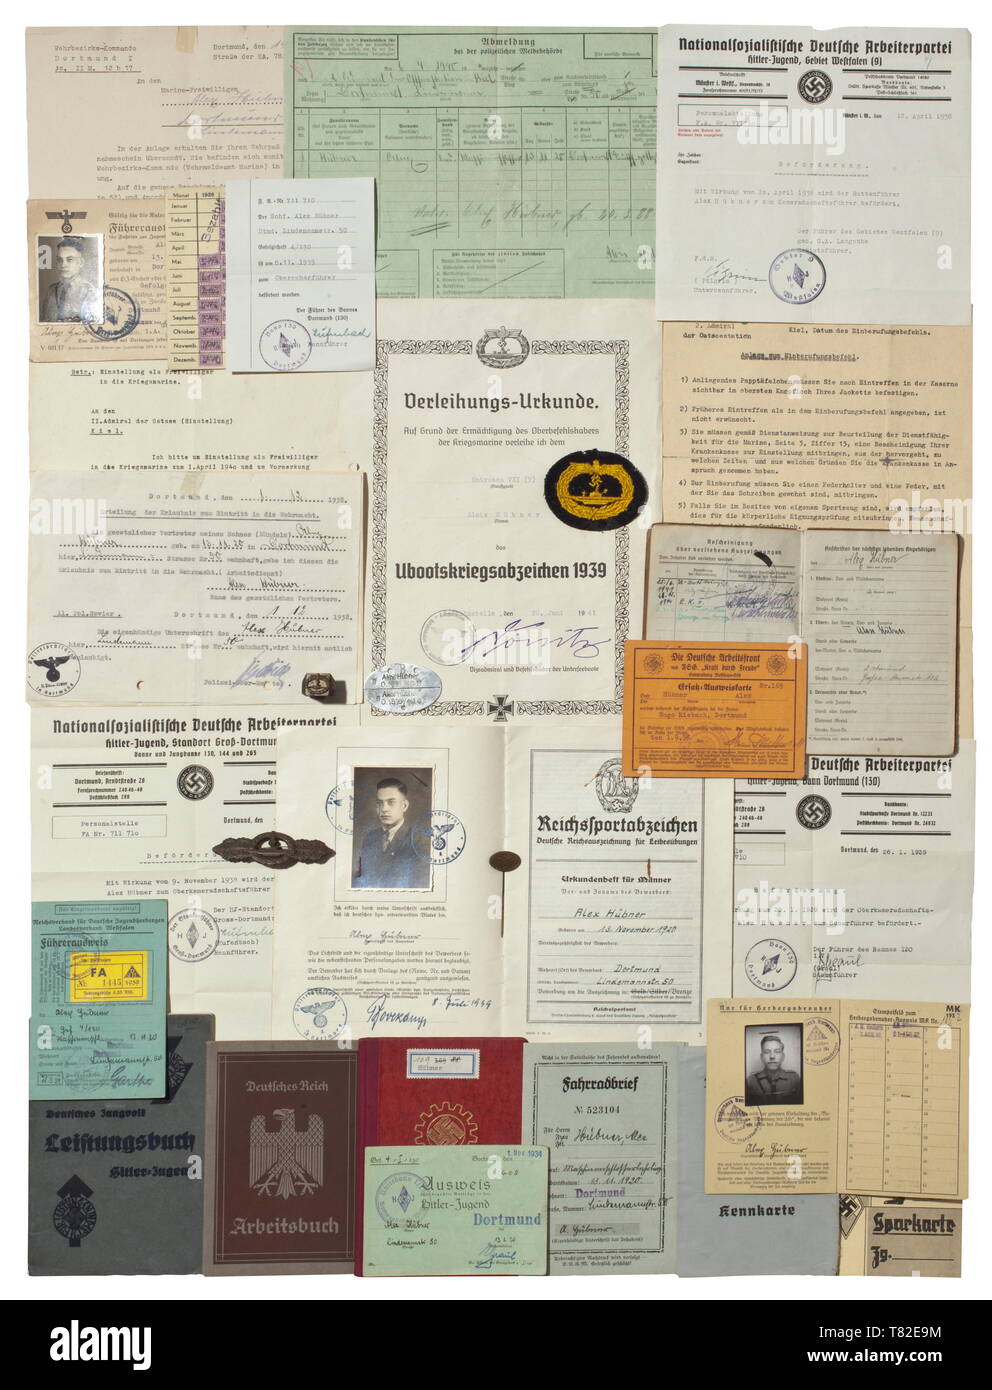 The estate of Petty Officer 2nd Class Alex Hübner, crew member of U-48, U-167 and U-775 Decorations, pay book and various documents. The pay book with photo id, issued on 11 August 1941 with numerous entries such as awards (U-Boat War Badge, U-Boat Combat Clasp, Iron Cross 2nd Class), promotions and assignment changes with various U-Boat flotillas. Also the award document for the U-Boat War Badge with facsimile signature of Dönitz issued on 26 June 1941 with incorrect first name (Alois) including a rare cloth version of the badge, the U-Boat Combat Clasp in Bronze with reve, Editorial-Use-Only Stock Photo